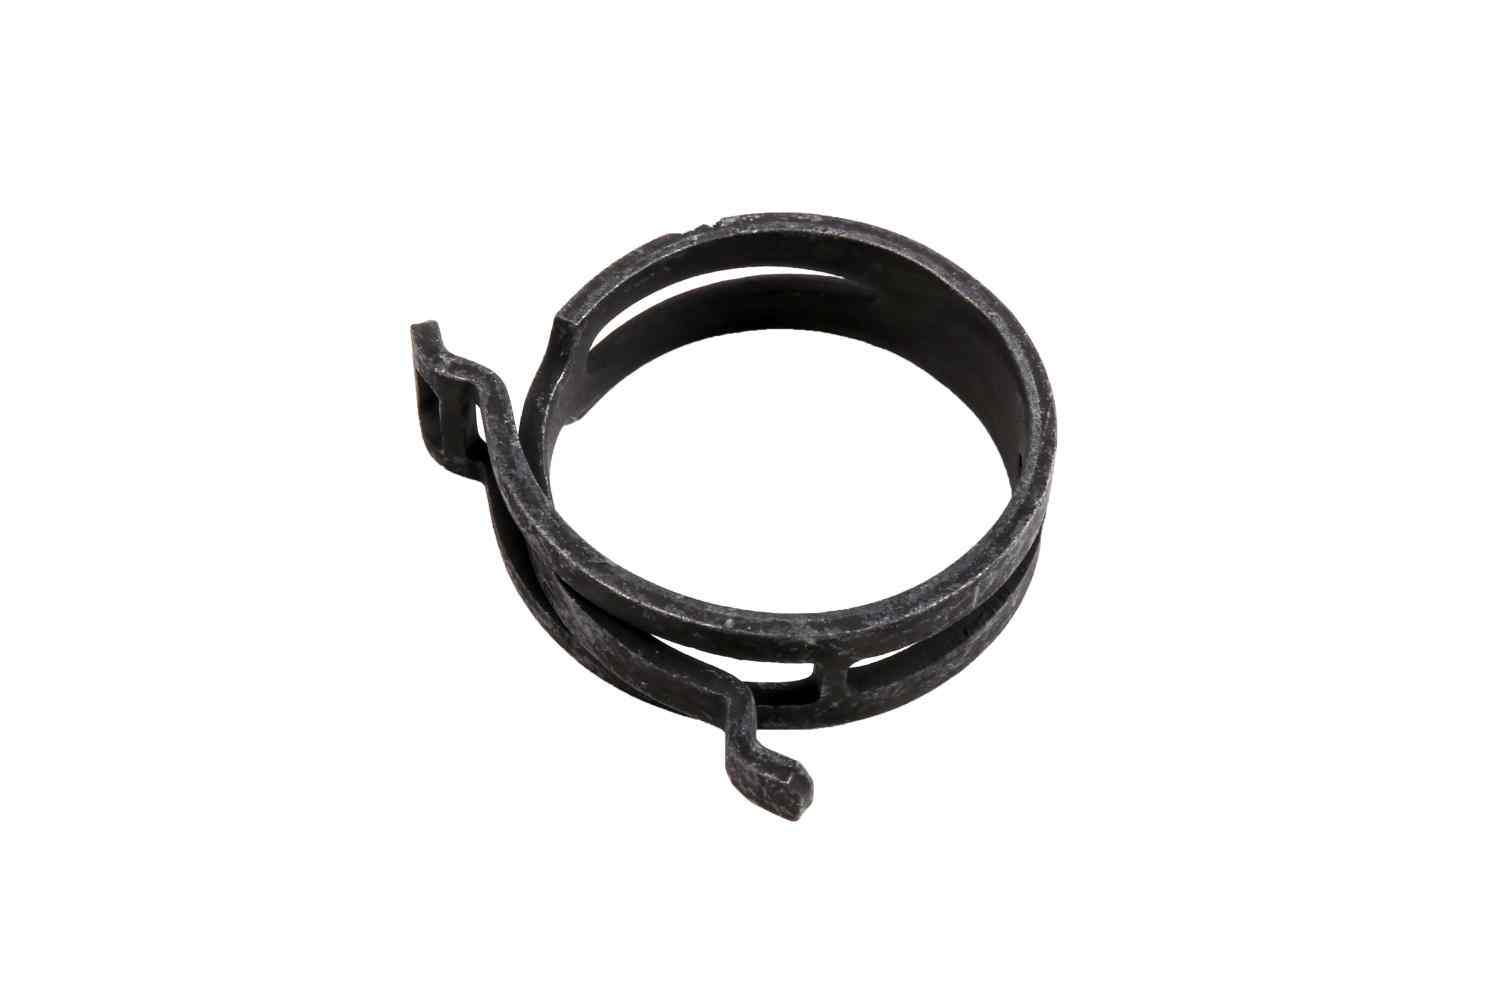 GM GENUINE PARTS - Radiator Surge Tank Outlet Hose Clamp - GMP 13162312